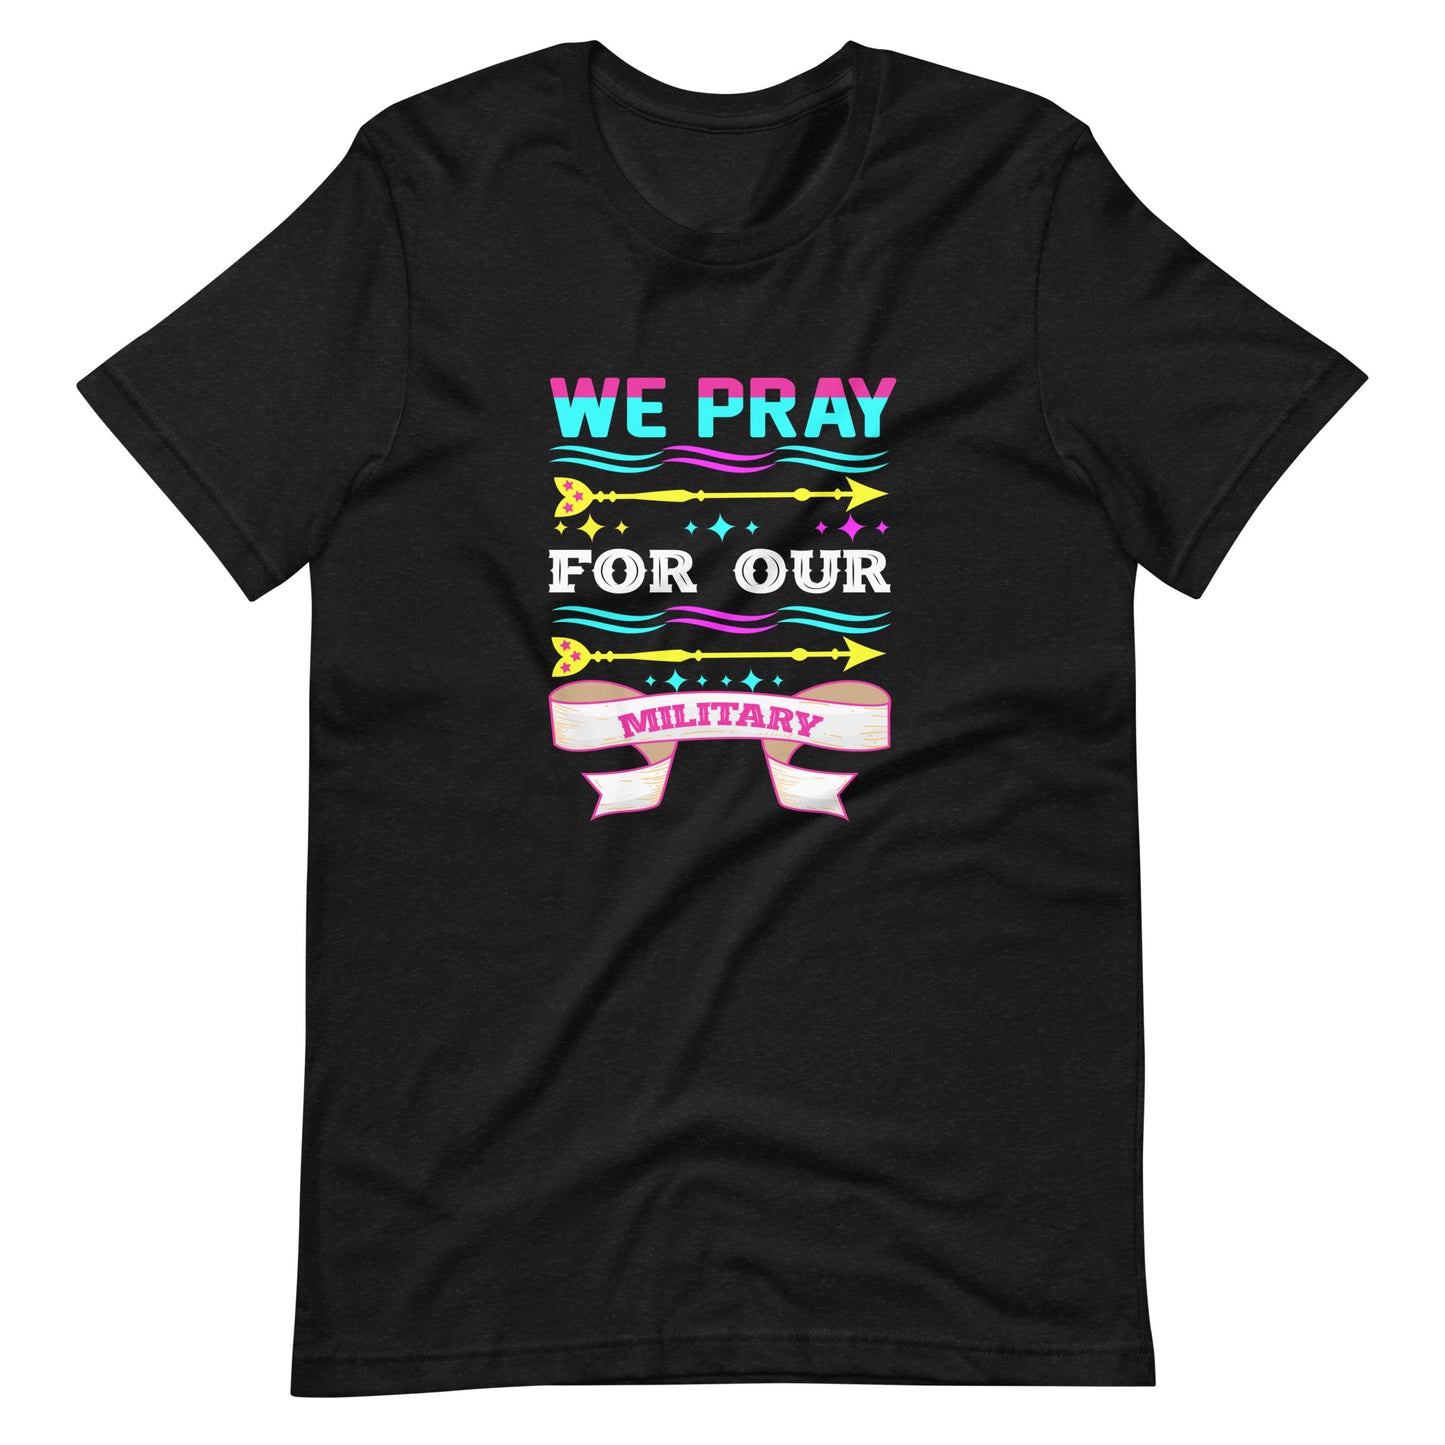 We Pray For Our Military | Unisex t-shirt